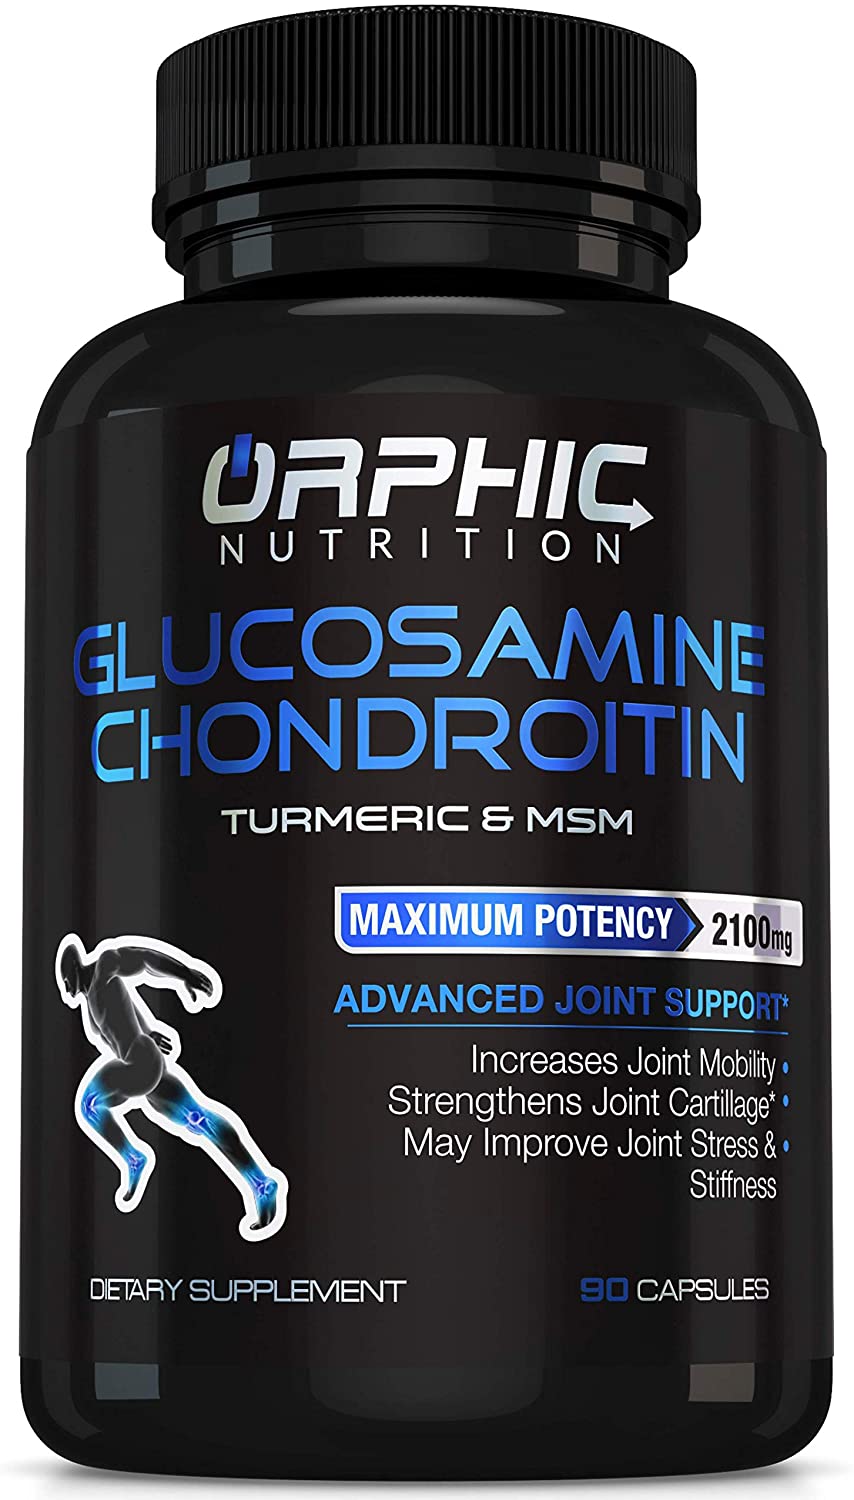 Review of Glucosamine Chondroitin - Turmeric & MSM 2100MG Anti Inflammatory Joint Support Supplements